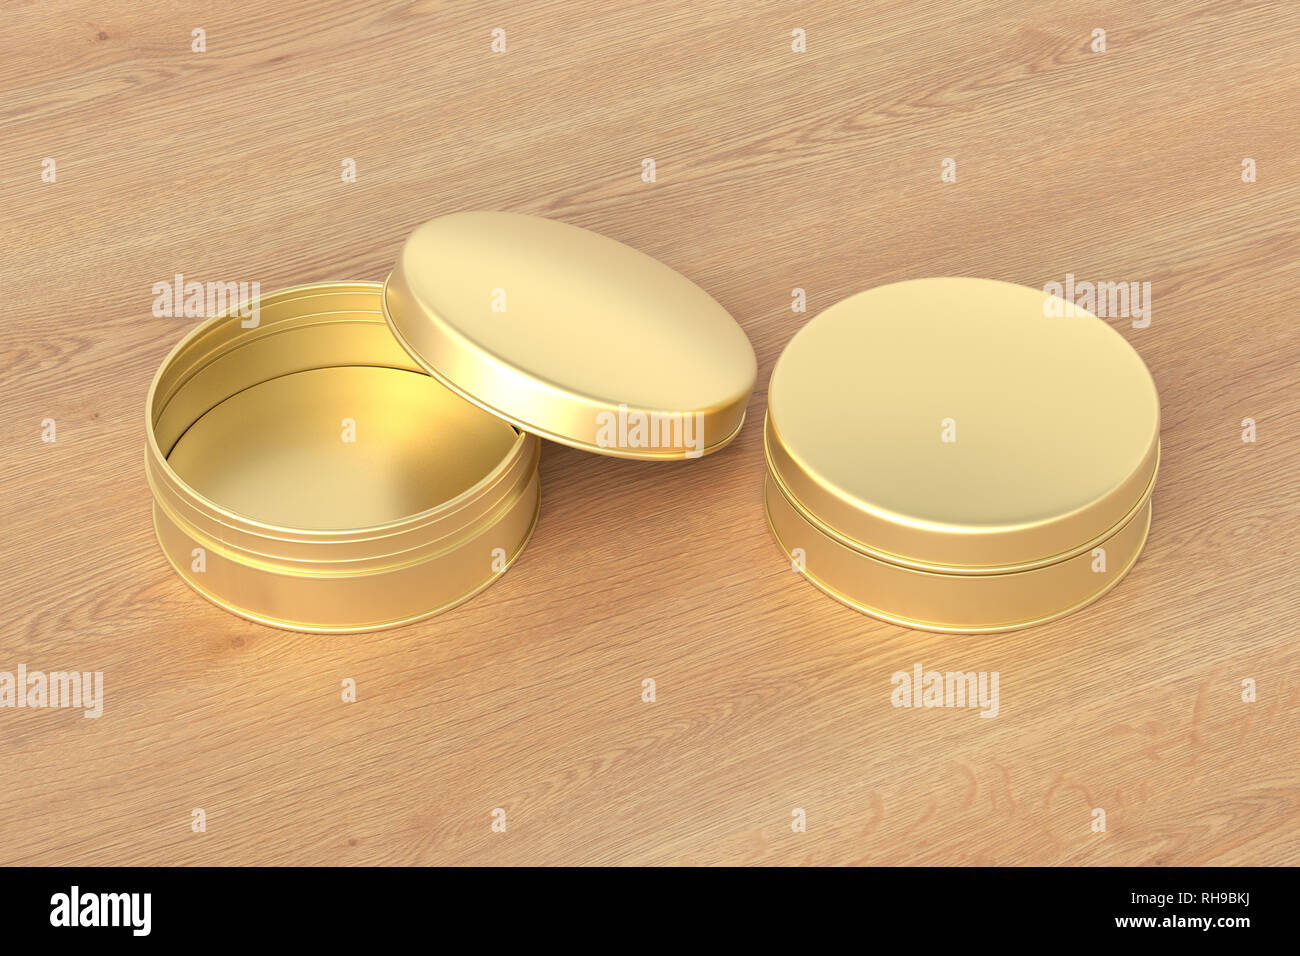 Download Blank Open And Closed Golden Beauty Cosmetic Containers Or Cream Jars On Wooden Background With Clipping Path Around Container 3d Illustration Stock Photo Alamy Yellowimages Mockups